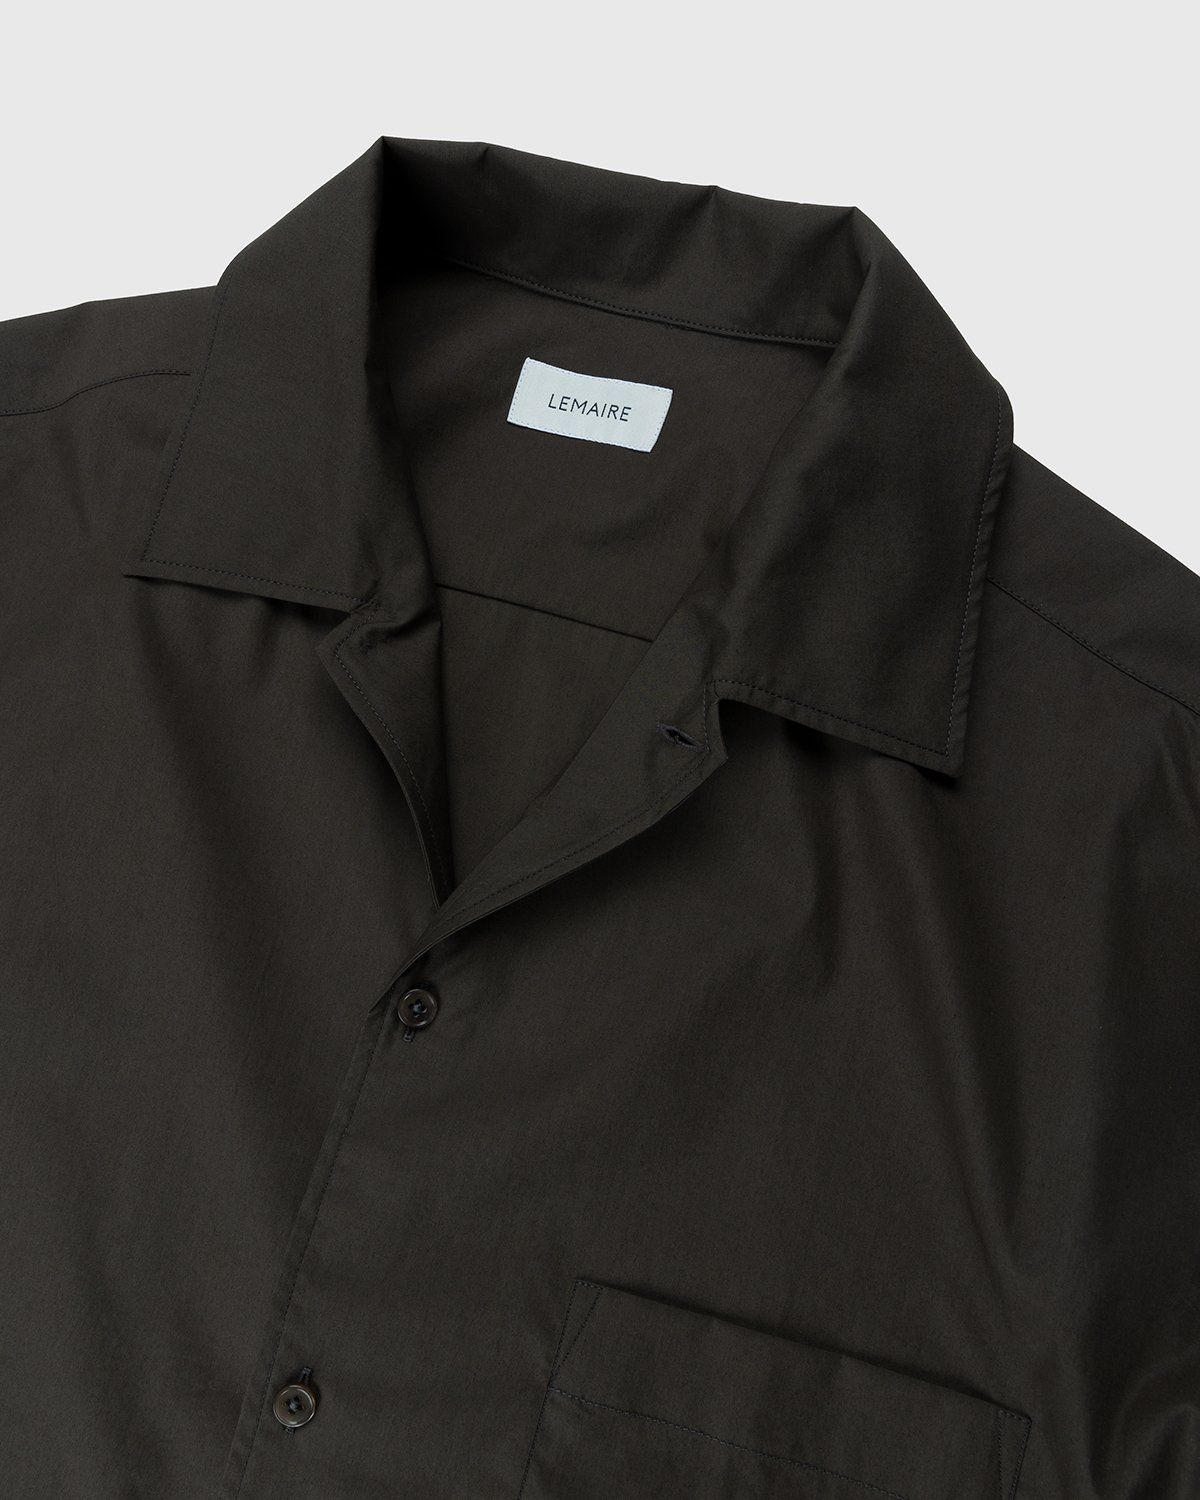 Lemaire – Convertible Collar Long Sleeve Shirt Espresso - Image 4